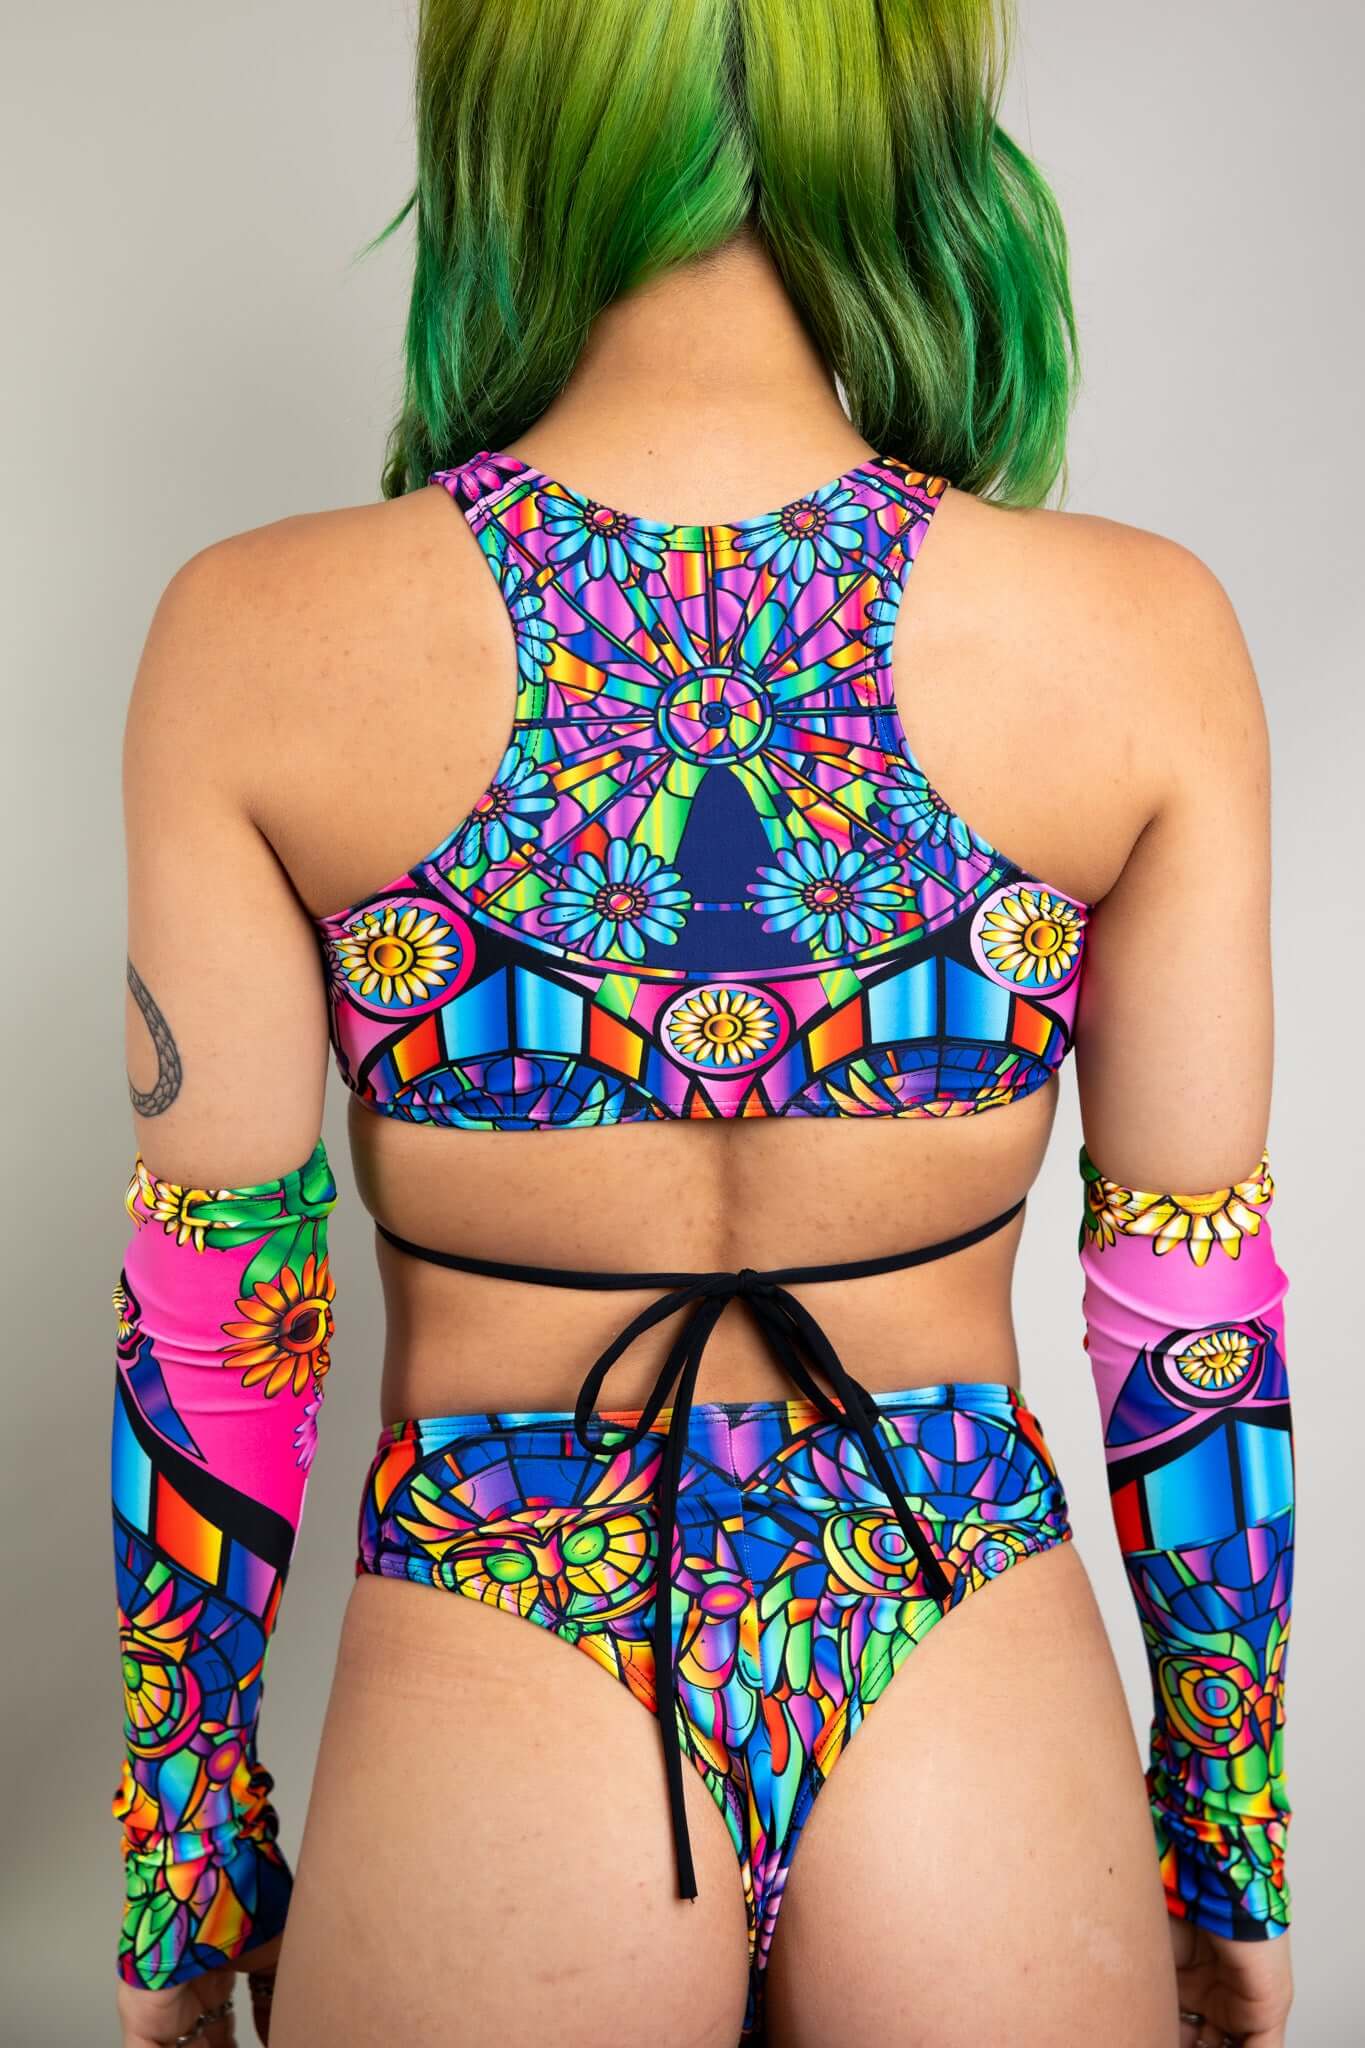 An up close photo of a girl wearing a rainbow stained glass printed crop top with black ties. She is facing away from the camera.